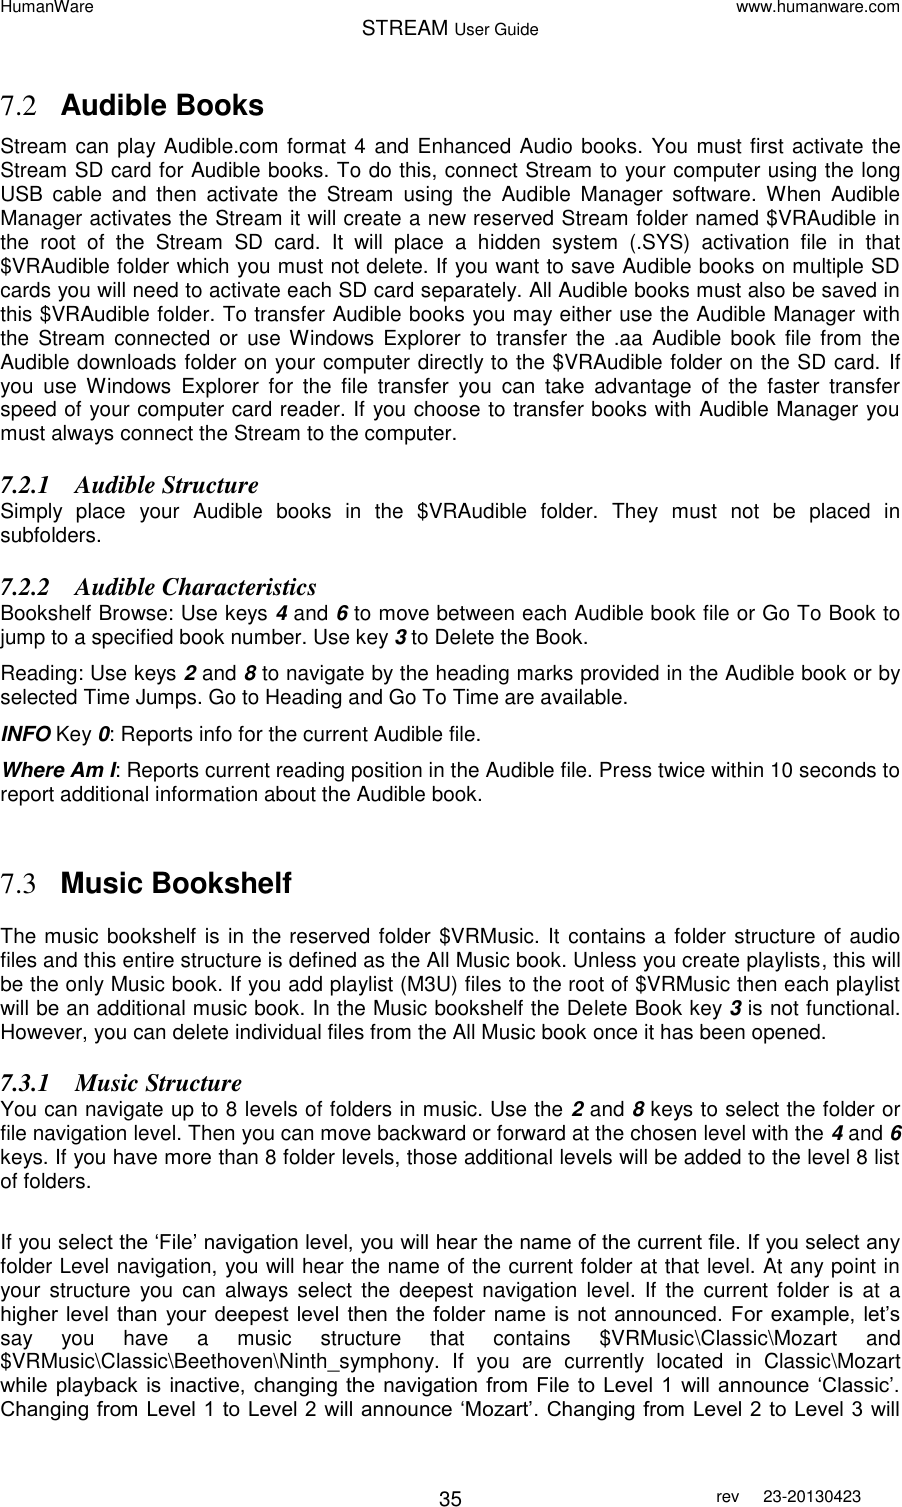 HumanWare www.humanware.com STREAM User Guide        35 rev  23-20130423   7.2 Audible Books Stream can play Audible.com format 4 and Enhanced Audio books. You must first activate the Stream SD card for Audible books. To do this, connect Stream to your computer using the long USB  cable  and  then  activate  the  Stream  using  the  Audible  Manager  software.  When  Audible Manager activates the Stream it will create a new reserved Stream folder named $VRAudible in the  root  of  the  Stream  SD  card.  It  will  place  a  hidden  system  (.SYS)  activation  file  in  that $VRAudible folder which you must not delete. If you want to save Audible books on multiple SD cards you will need to activate each SD card separately. All Audible books must also be saved in this $VRAudible folder. To transfer Audible books you may either use the Audible Manager with the  Stream  connected  or  use Windows  Explorer  to  transfer  the .aa  Audible  book  file  from  the Audible downloads folder on your computer directly to the $VRAudible folder on the SD card. If you  use  Windows  Explorer  for  the  file  transfer  you  can  take  advantage  of  the  faster  transfer speed of your computer card reader. If you choose to transfer books with Audible Manager you must always connect the Stream to the computer. 7.2.1 Audible Structure Simply  place  your  Audible  books  in  the  $VRAudible  folder.  They  must  not  be  placed  in subfolders. 7.2.2 Audible Characteristics Bookshelf Browse: Use keys 4 and 6 to move between each Audible book file or Go To Book to jump to a specified book number. Use key 3 to Delete the Book. Reading: Use keys 2 and 8 to navigate by the heading marks provided in the Audible book or by selected Time Jumps. Go to Heading and Go To Time are available. INFO Key 0: Reports info for the current Audible file. Where Am I: Reports current reading position in the Audible file. Press twice within 10 seconds to report additional information about the Audible book.   7.3 Music Bookshelf  The music bookshelf is in the reserved folder $VRMusic. It contains a folder structure of audio files and this entire structure is defined as the All Music book. Unless you create playlists, this will be the only Music book. If you add playlist (M3U) files to the root of $VRMusic then each playlist will be an additional music book. In the Music bookshelf the Delete Book key 3 is not functional. However, you can delete individual files from the All Music book once it has been opened. 7.3.1 Music Structure You can navigate up to 8 levels of folders in music. Use the 2 and 8 keys to select the folder or file navigation level. Then you can move backward or forward at the chosen level with the 4 and 6 keys. If you have more than 8 folder levels, those additional levels will be added to the level 8 list of folders.  If you select the ‘File’ navigation level, you will hear the name of the current file. If you select any folder Level navigation, you will hear the name of the current folder at that level. At any point in your  structure  you  can always select  the  deepest navigation  level. If  the  current folder  is  at  a higher level than  your  deepest  level  then  the  folder name  is  not  announced.  For example,  let’s say  you  have  a  music  structure  that  contains  $VRMusic\Classic\Mozart  and $VRMusic\Classic\Beethoven\Ninth_symphony.  If  you  are  currently  located  in  Classic\Mozart while playback  is  inactive,  changing  the  navigation from  File to Level 1  will announce  ‘Classic’. Changing from Level 1 to Level 2 will announce ‘Mozart’. Changing from Level 2 to Level 3 will 